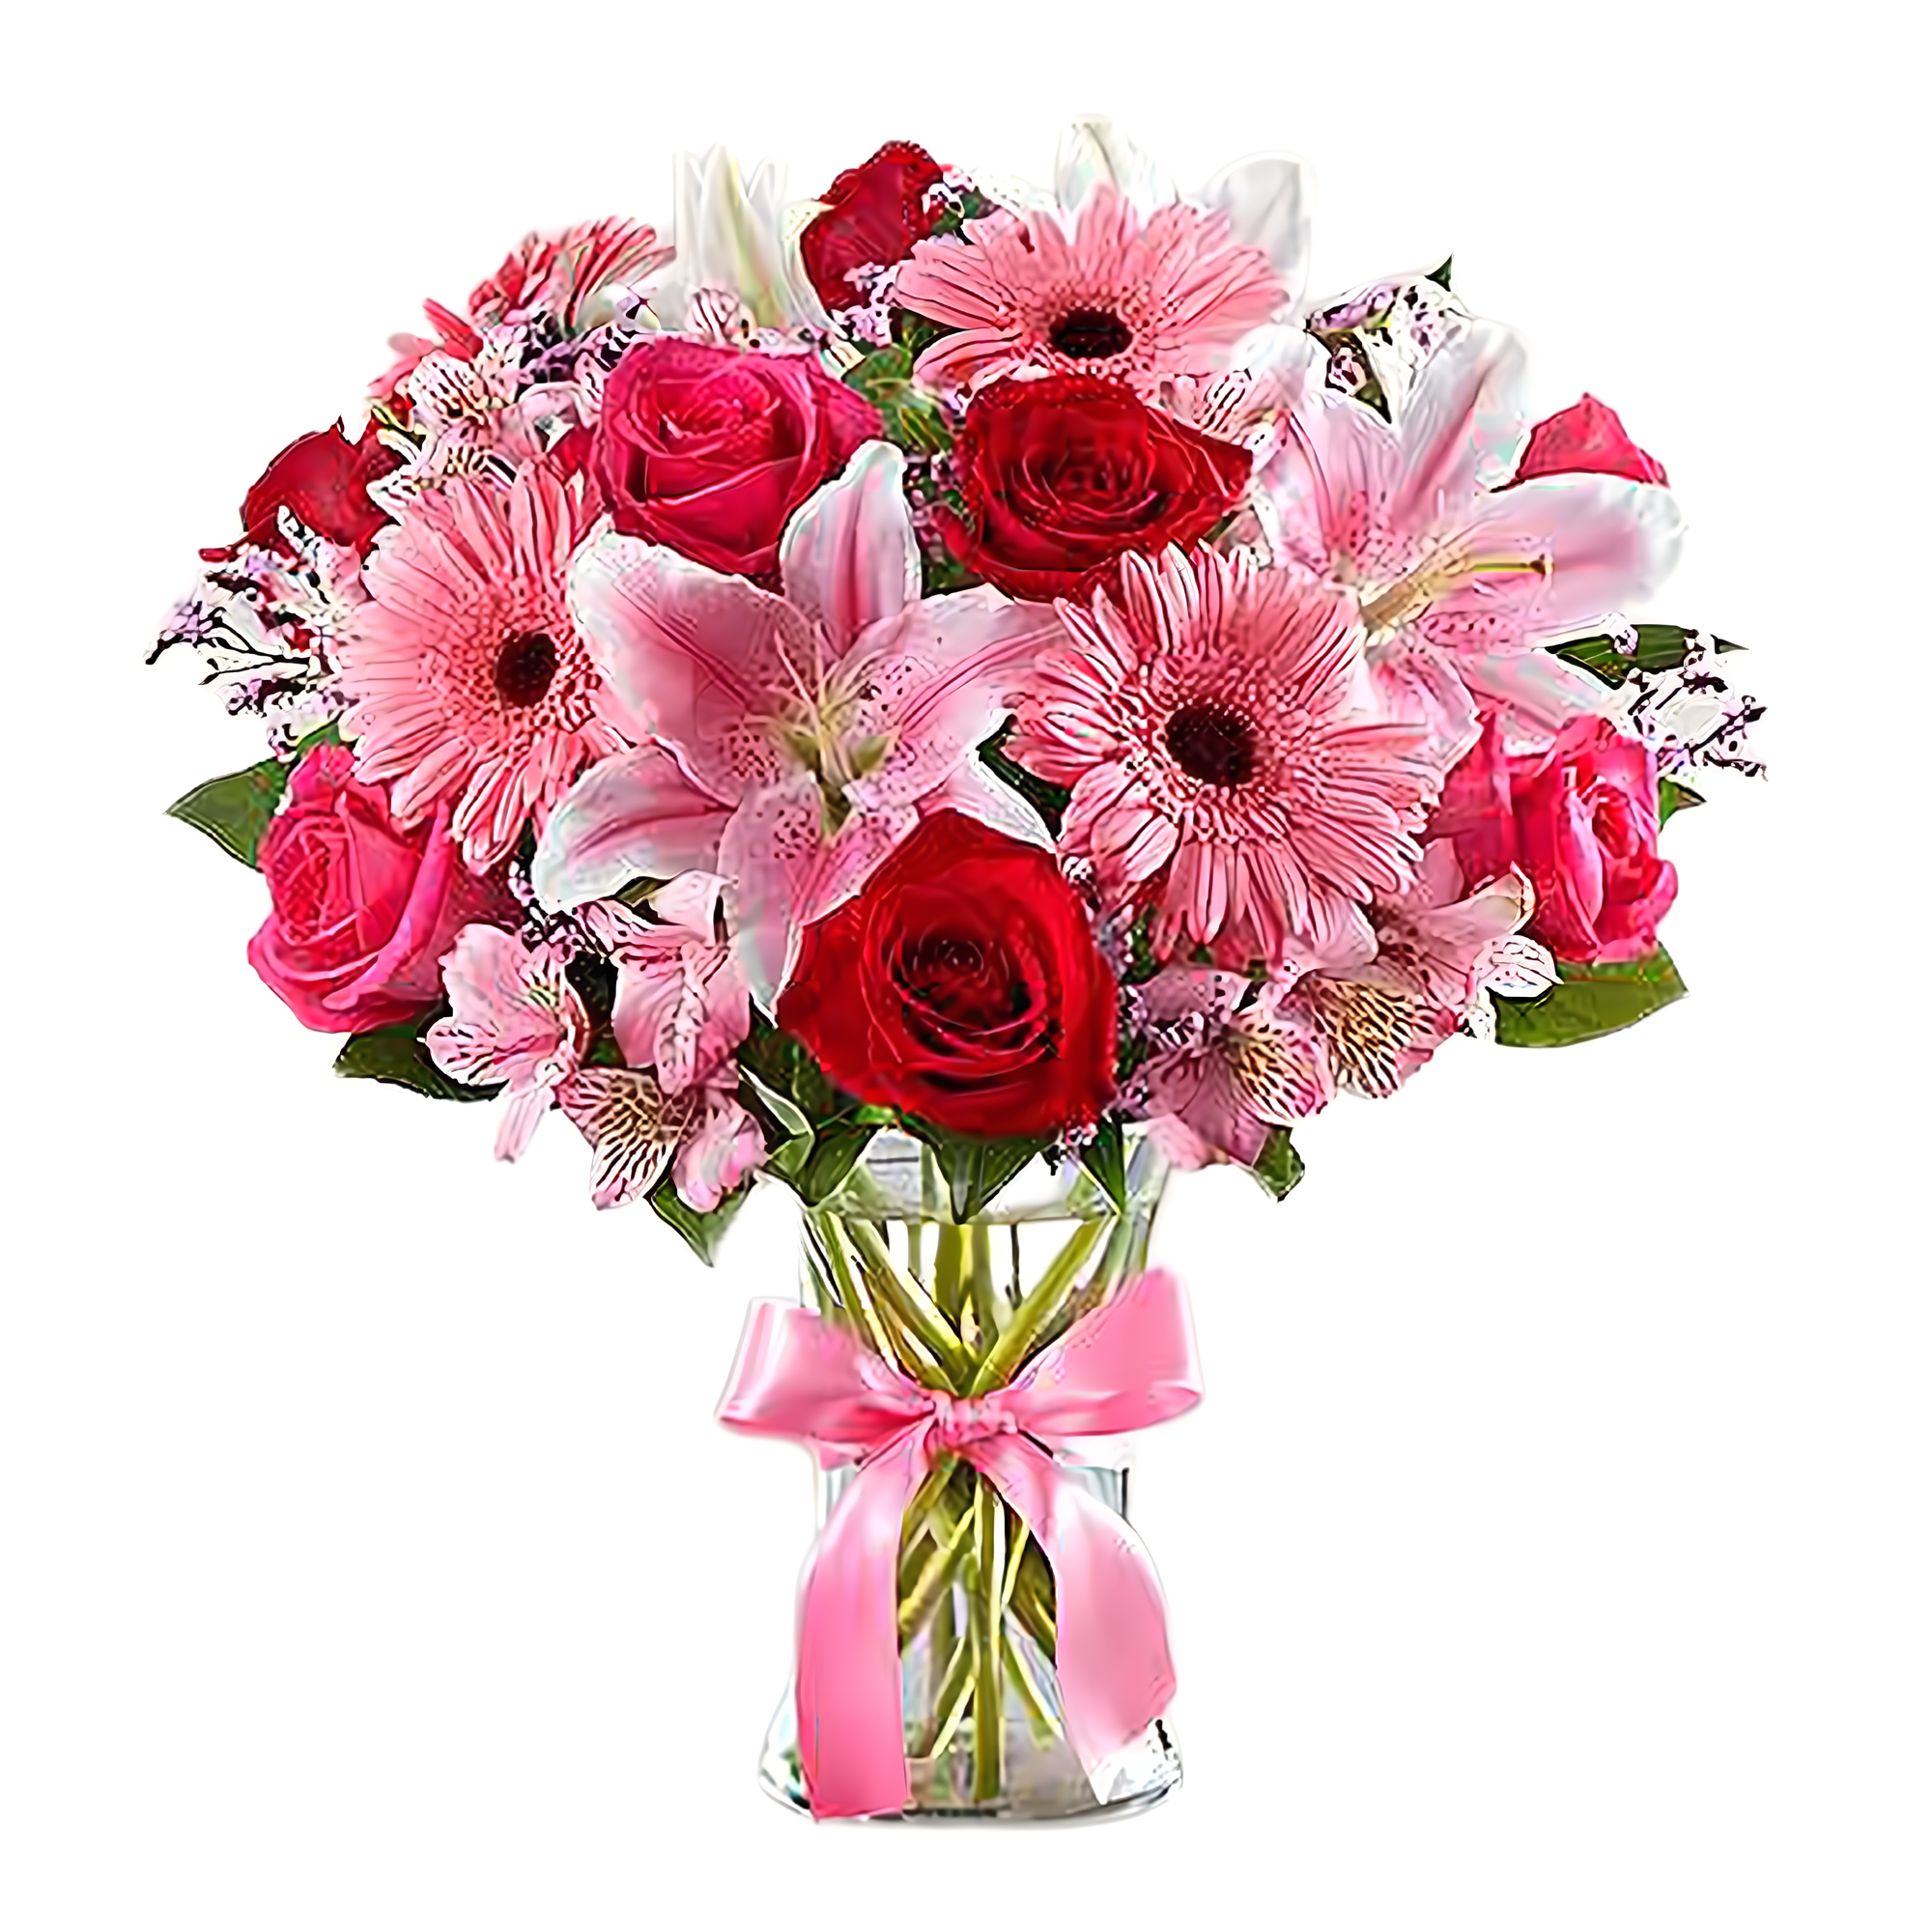 Manhattan Flower Delivery - Fields of Romance - Occasions > Anniversary